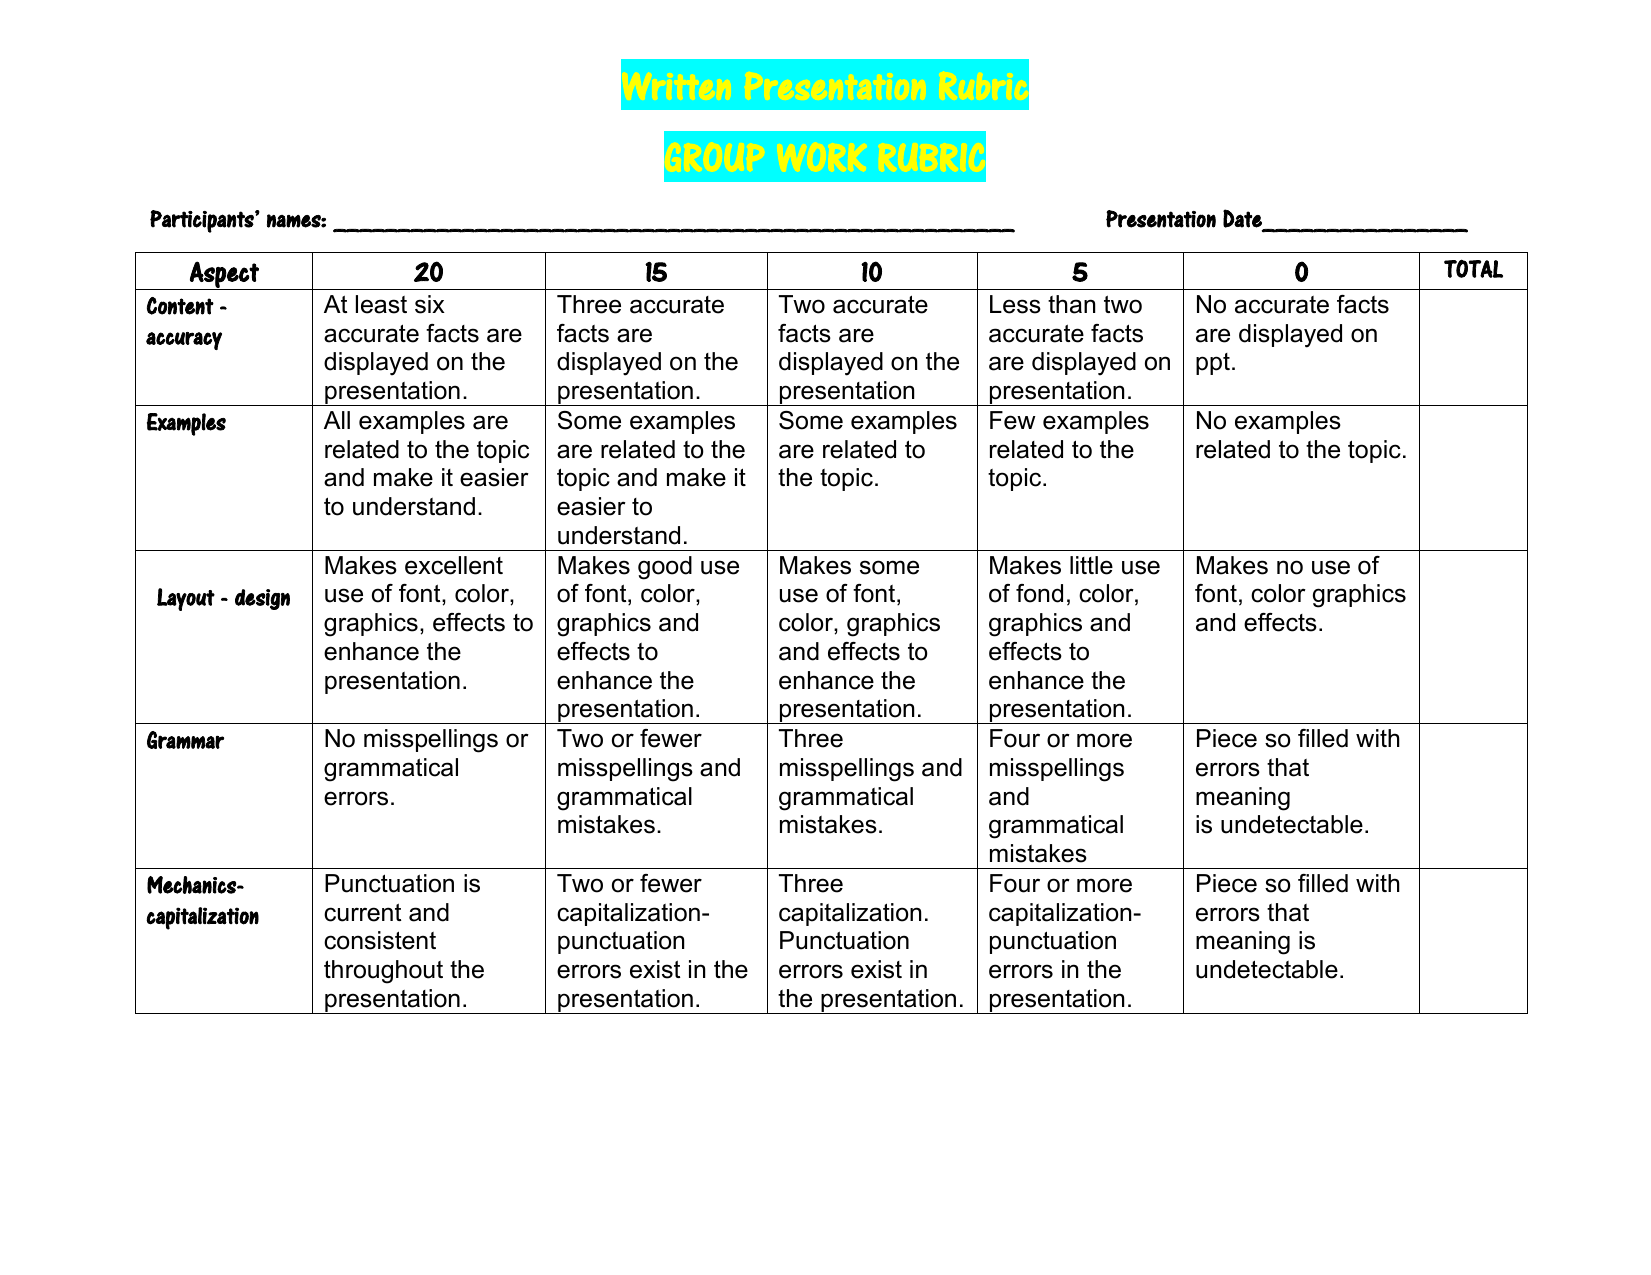 rubrics for presentation of group activity